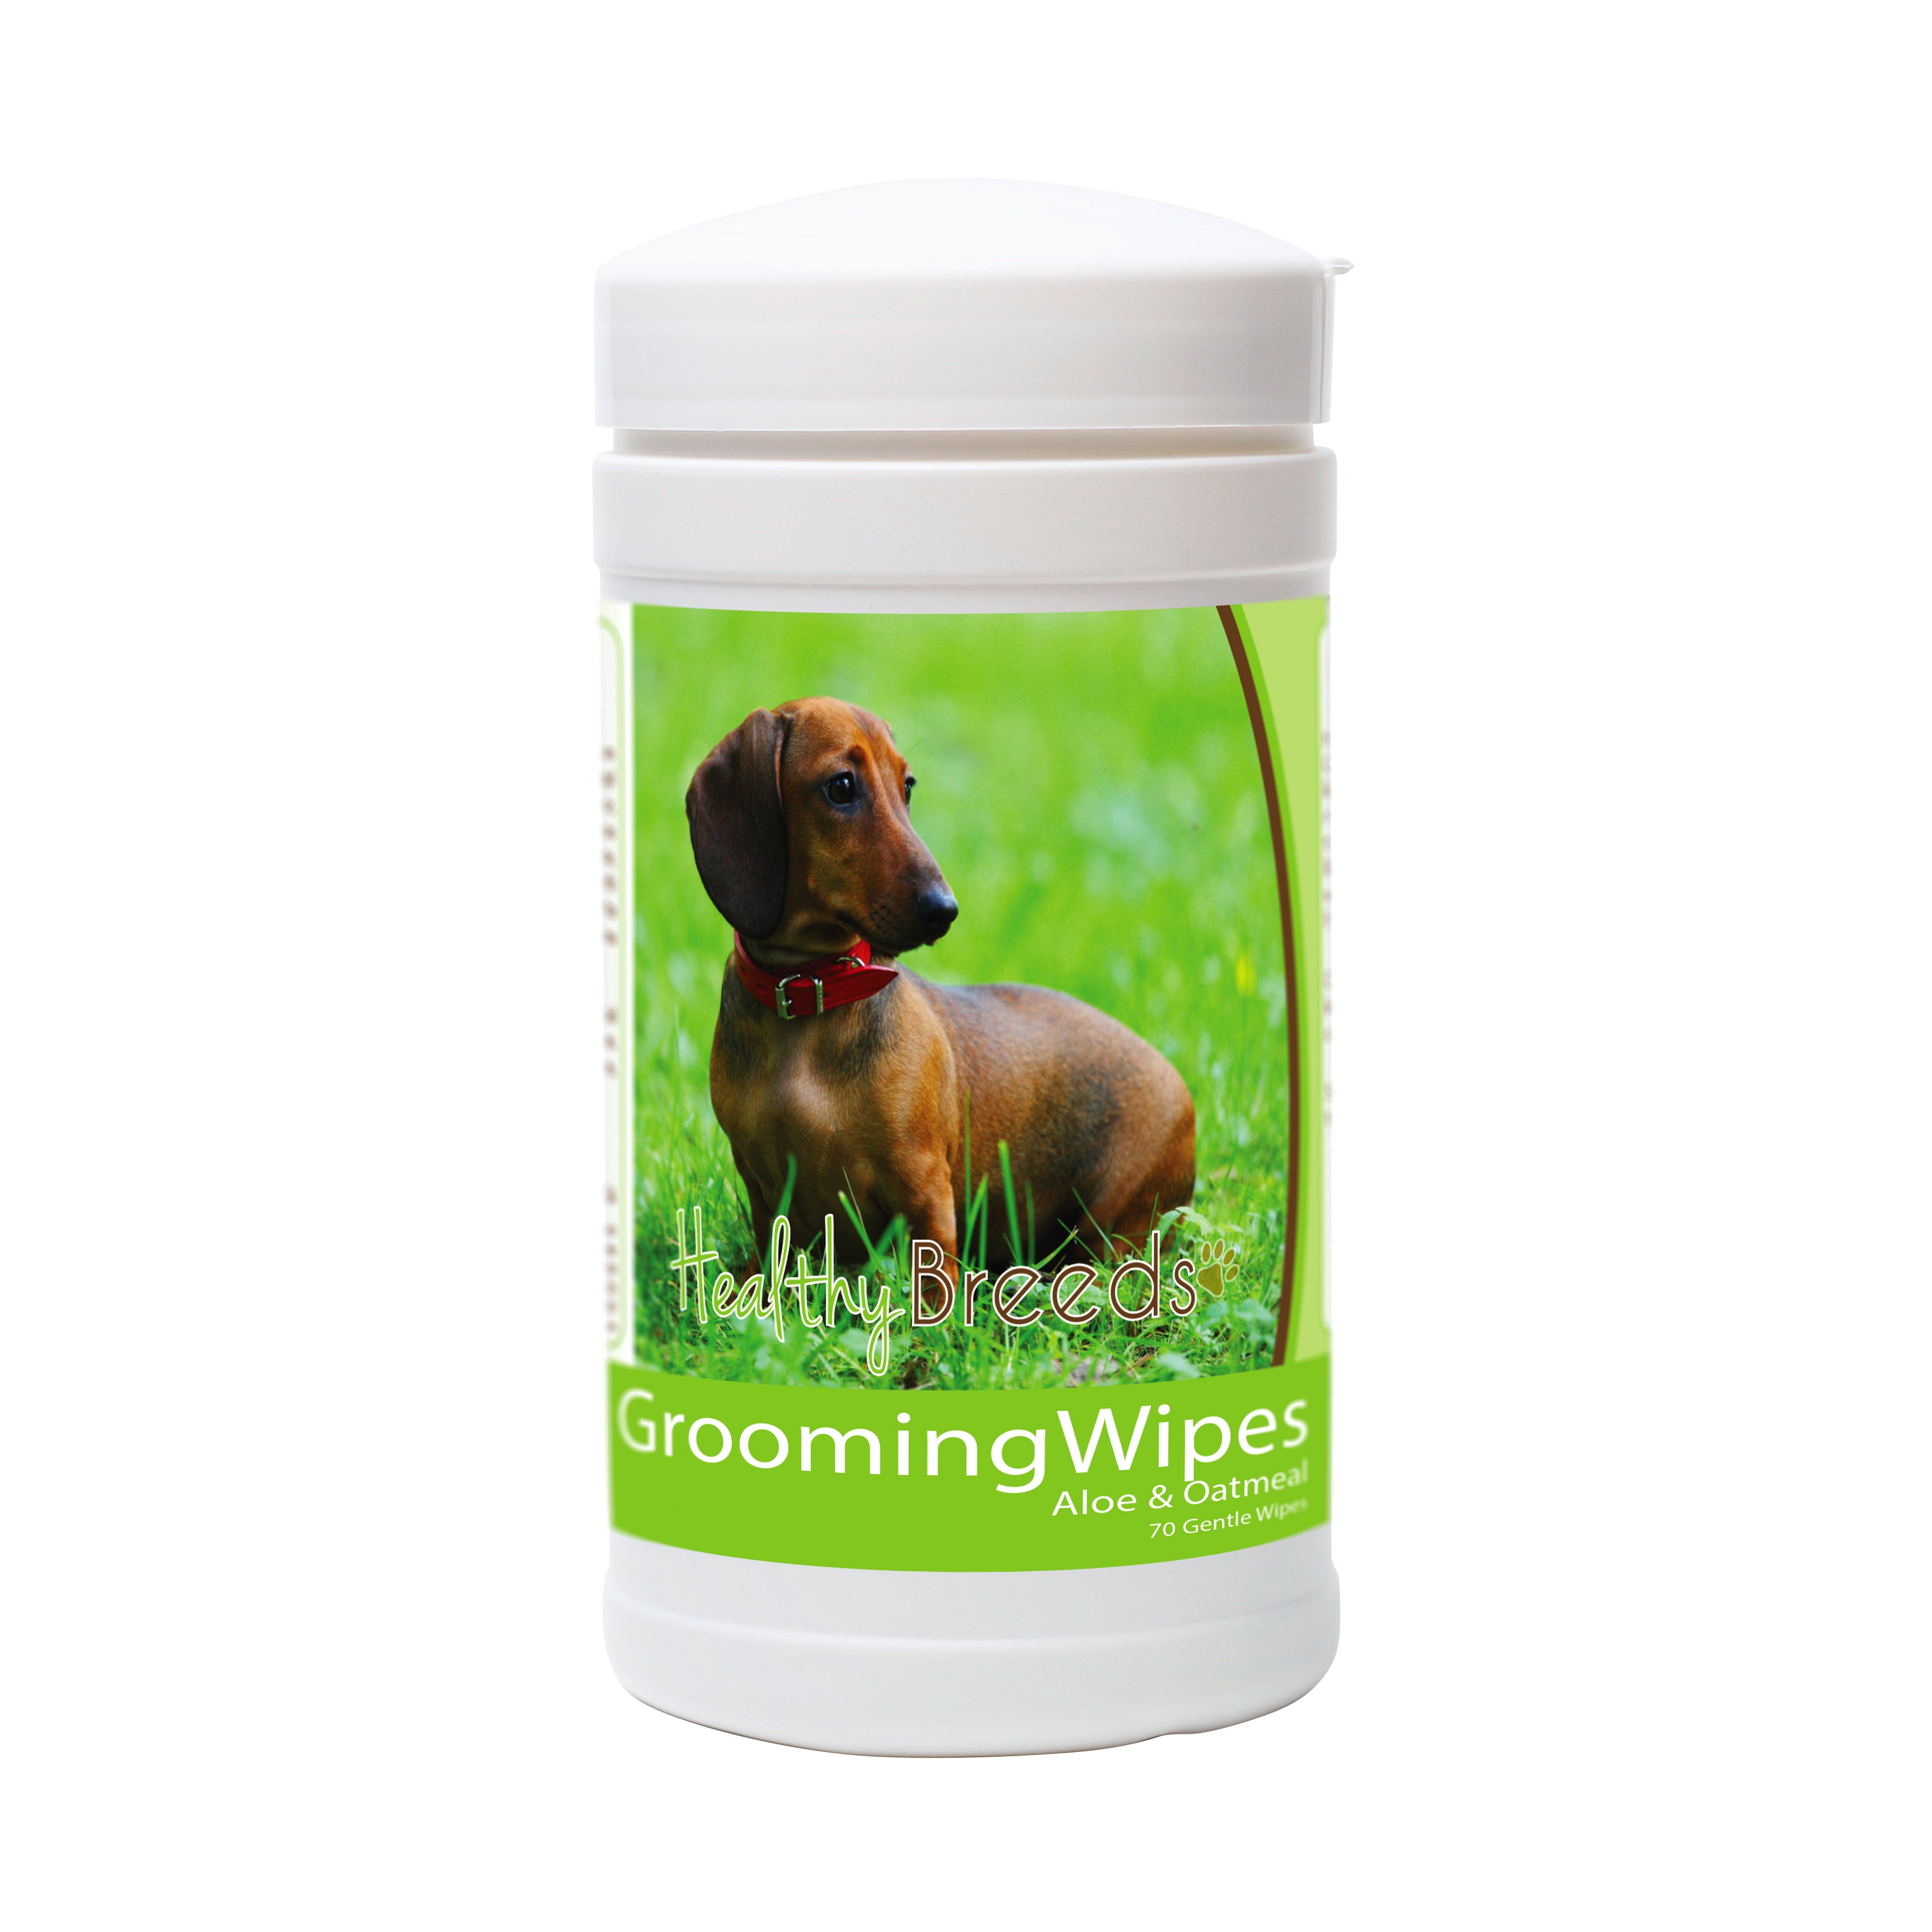 Dachshund Grooming Wipes 70 Count